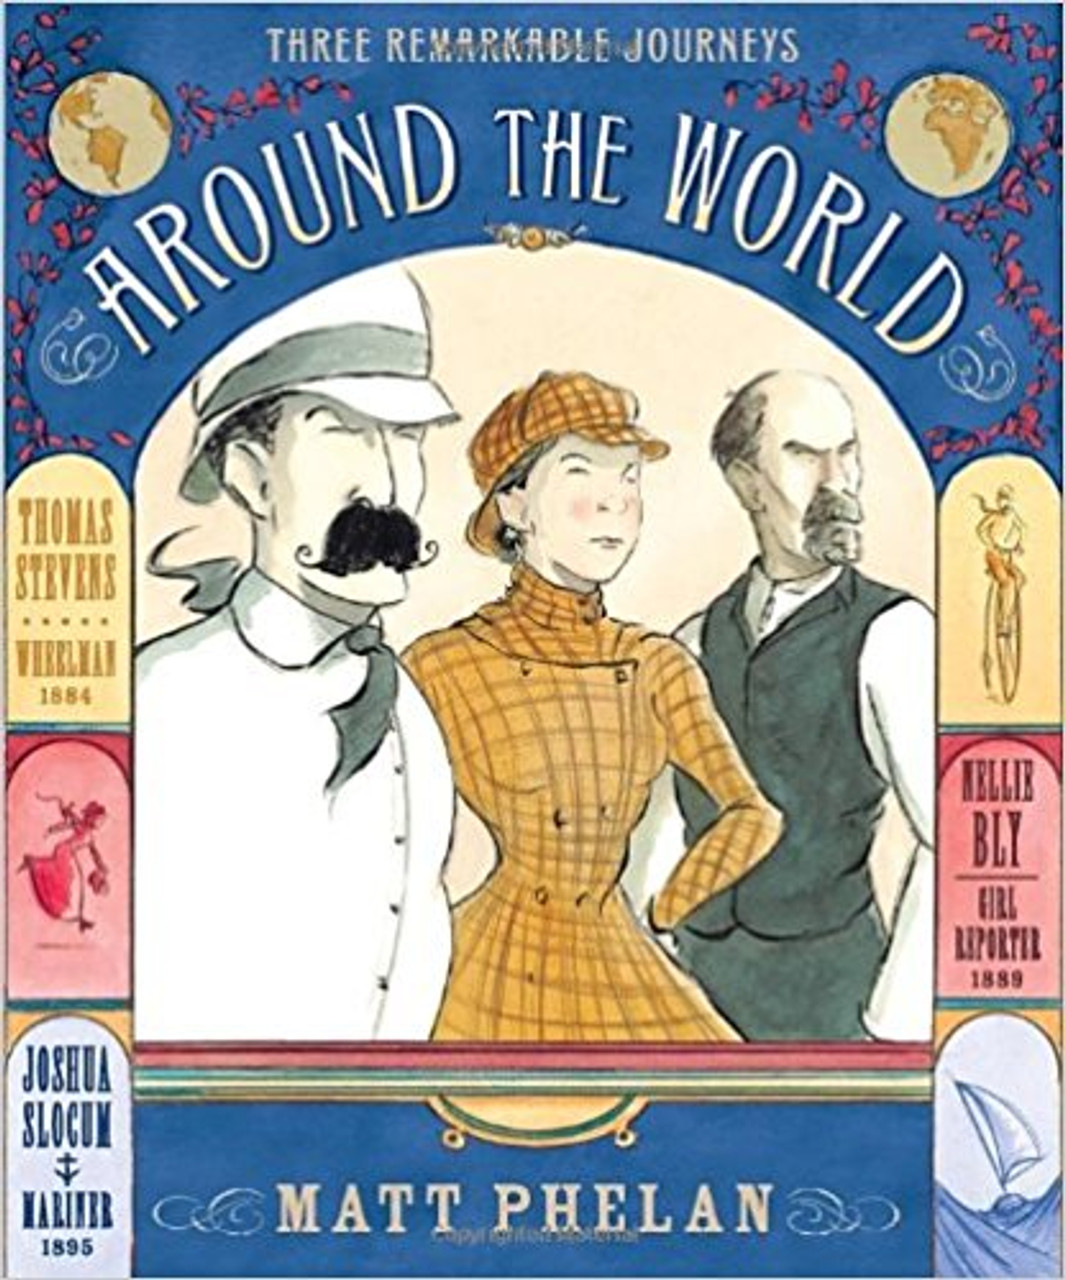 A Scott O'Dell Award-winning graphic novelist follows three dauntless adventurers on a Jules Verne-inspired challenge: circling the world, solo! 